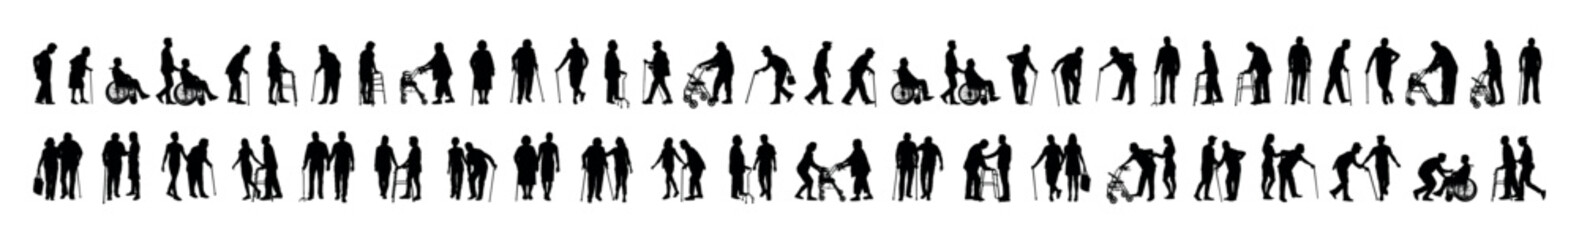 Group of elderly people with walking aids in various poses vector silhouettes set. Caregiver nurse helping senior people walking using walking aid silhouette set collection.	